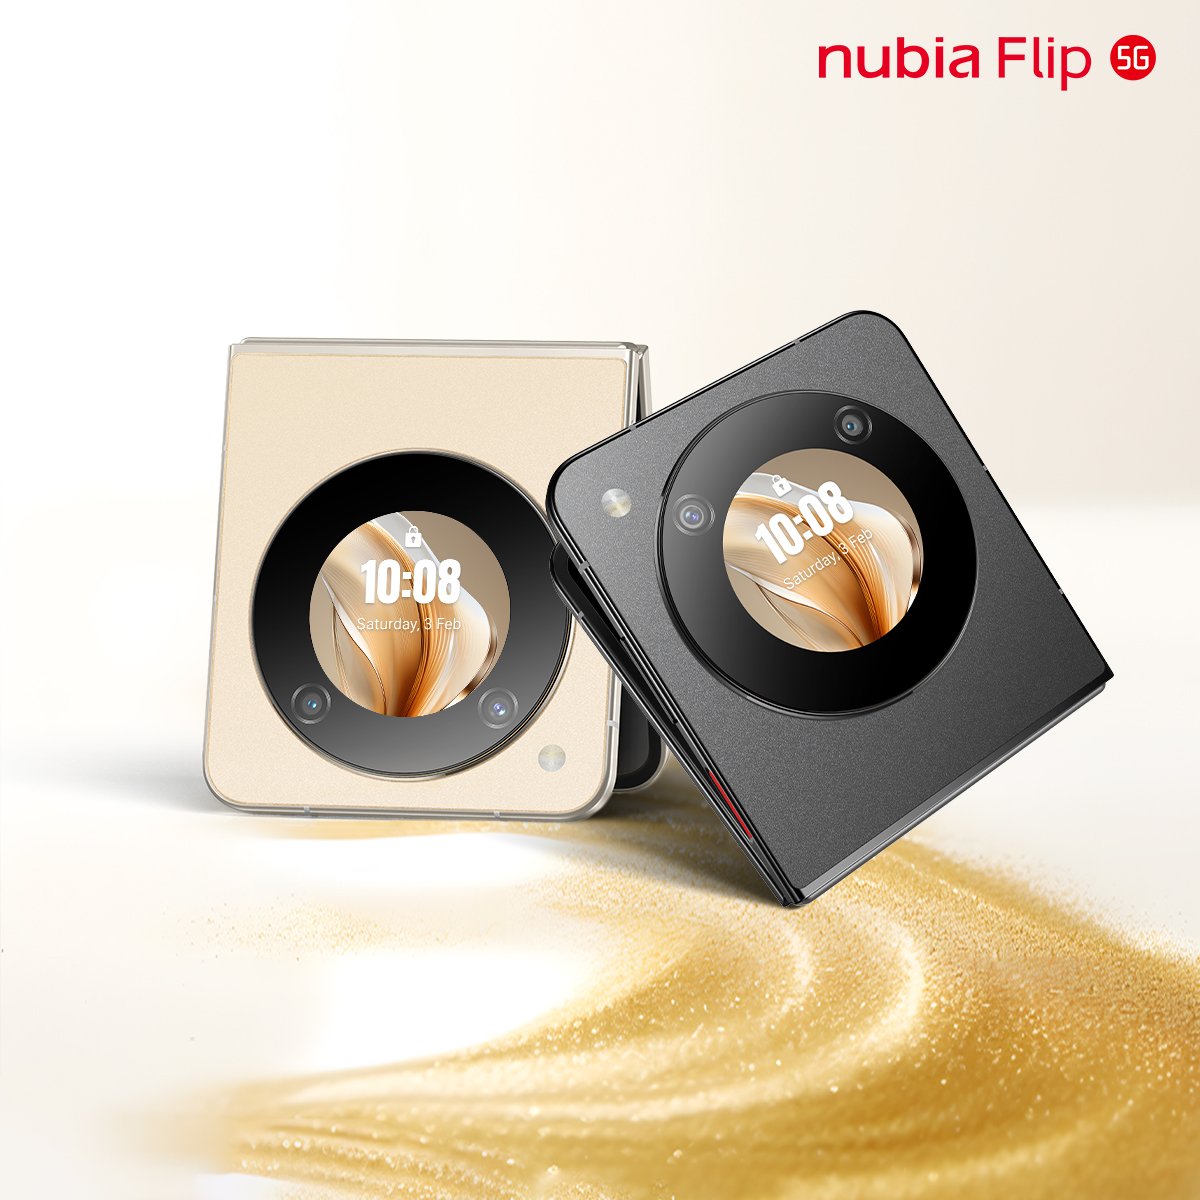 Here it is, nubia flip 5G in all its glory! Compact yet full-sized, this foldable beauty is perfectly priced and perfectly sized to slip into your pocket when it's time to shine. ✨ Visit our website for more details intl.nubia.com #ZTE #nubiaFlip5G